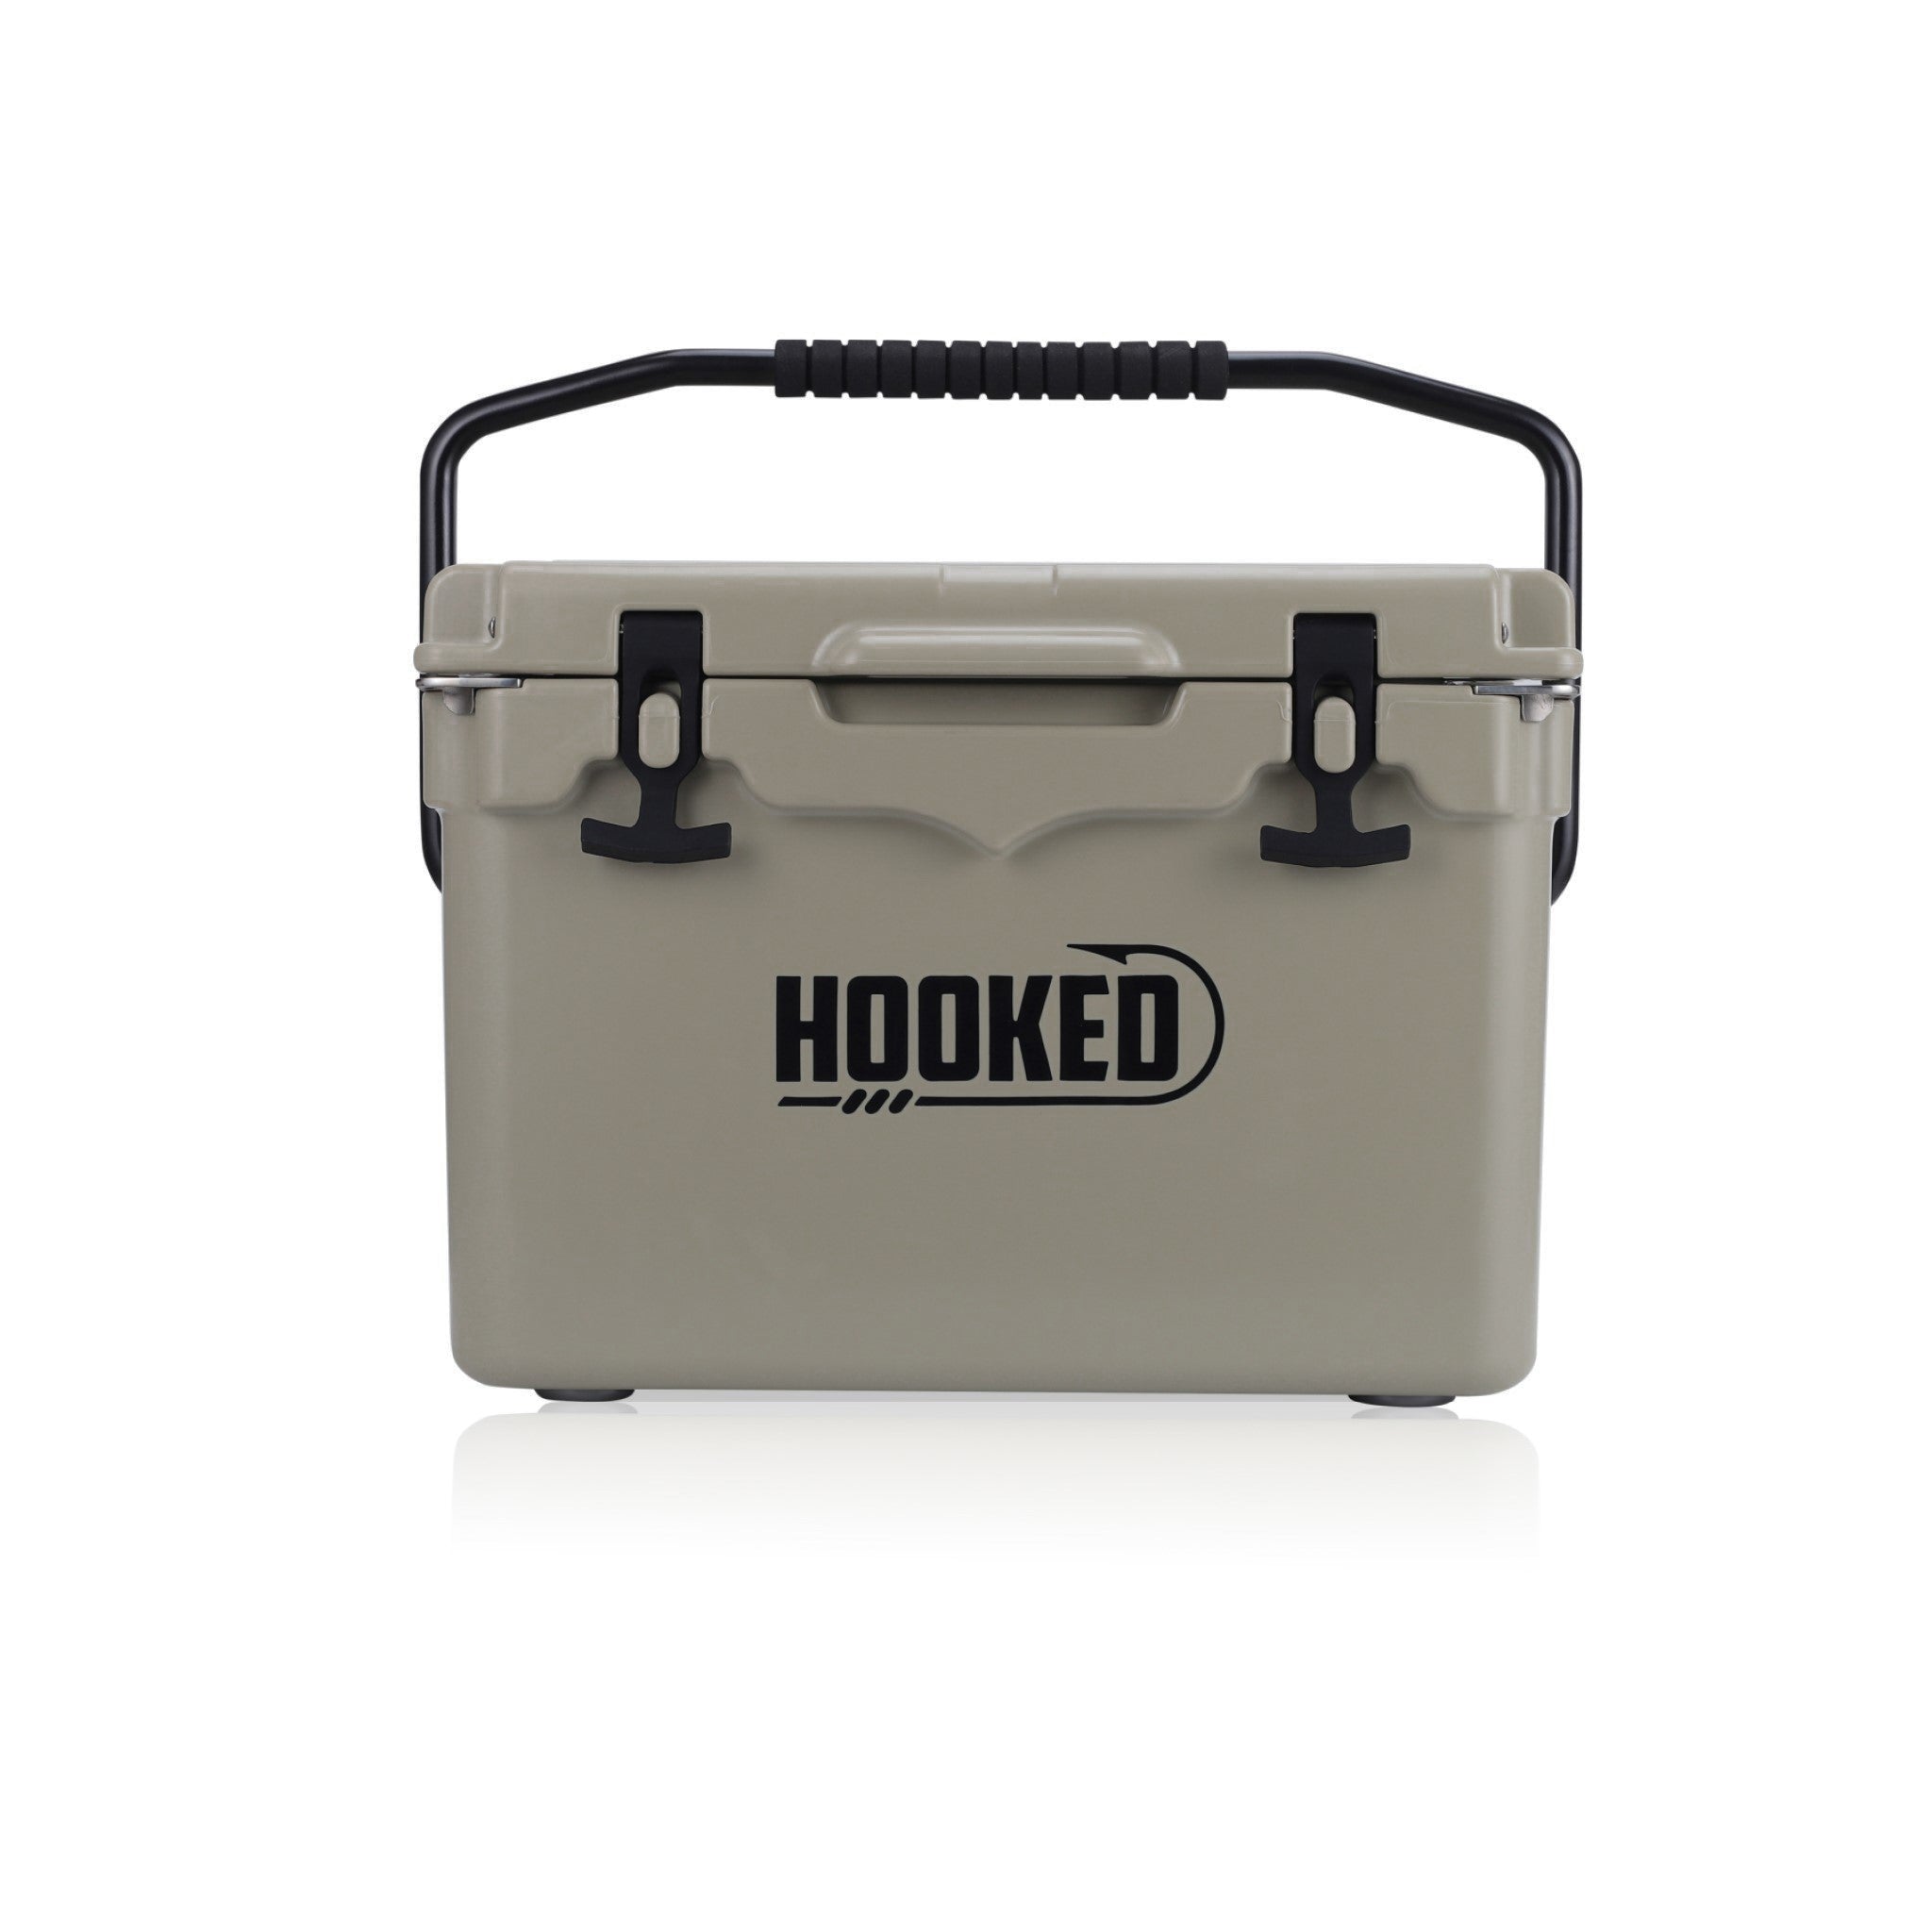 Hooked Coolers